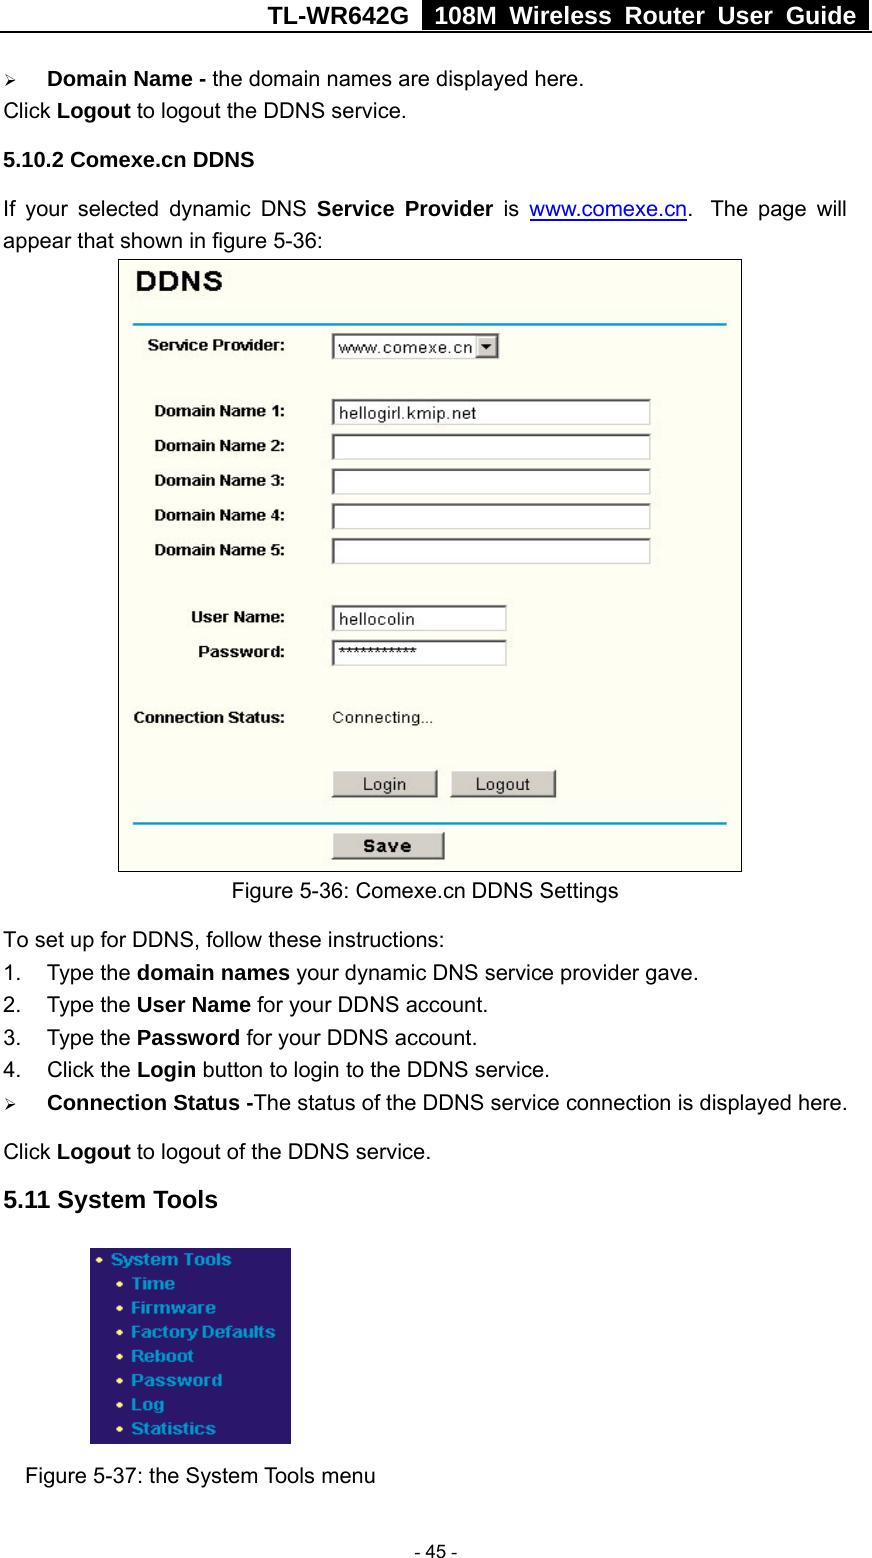 TL-WR642G   108M Wireless Router User Guide   - 45 - ¾ Domain Name - the domain names are displayed here. Click Logout to logout the DDNS service. 5.10.2 Comexe.cn DDNS If your selected dynamic DNS Service Provider is www.comexe.cn.  The page will appear that shown in figure 5-36:  Figure 5-36: Comexe.cn DDNS Settings To set up for DDNS, follow these instructions: 1. Type the domain names your dynamic DNS service provider gave.   2. Type the User Name for your DDNS account.   3. Type the Password for your DDNS account.   4. Click the Login button to login to the DDNS service. ¾ Connection Status -The status of the DDNS service connection is displayed here. Click Logout to logout of the DDNS service. 5.11 System Tools  Figure 5-37: the System Tools menu 